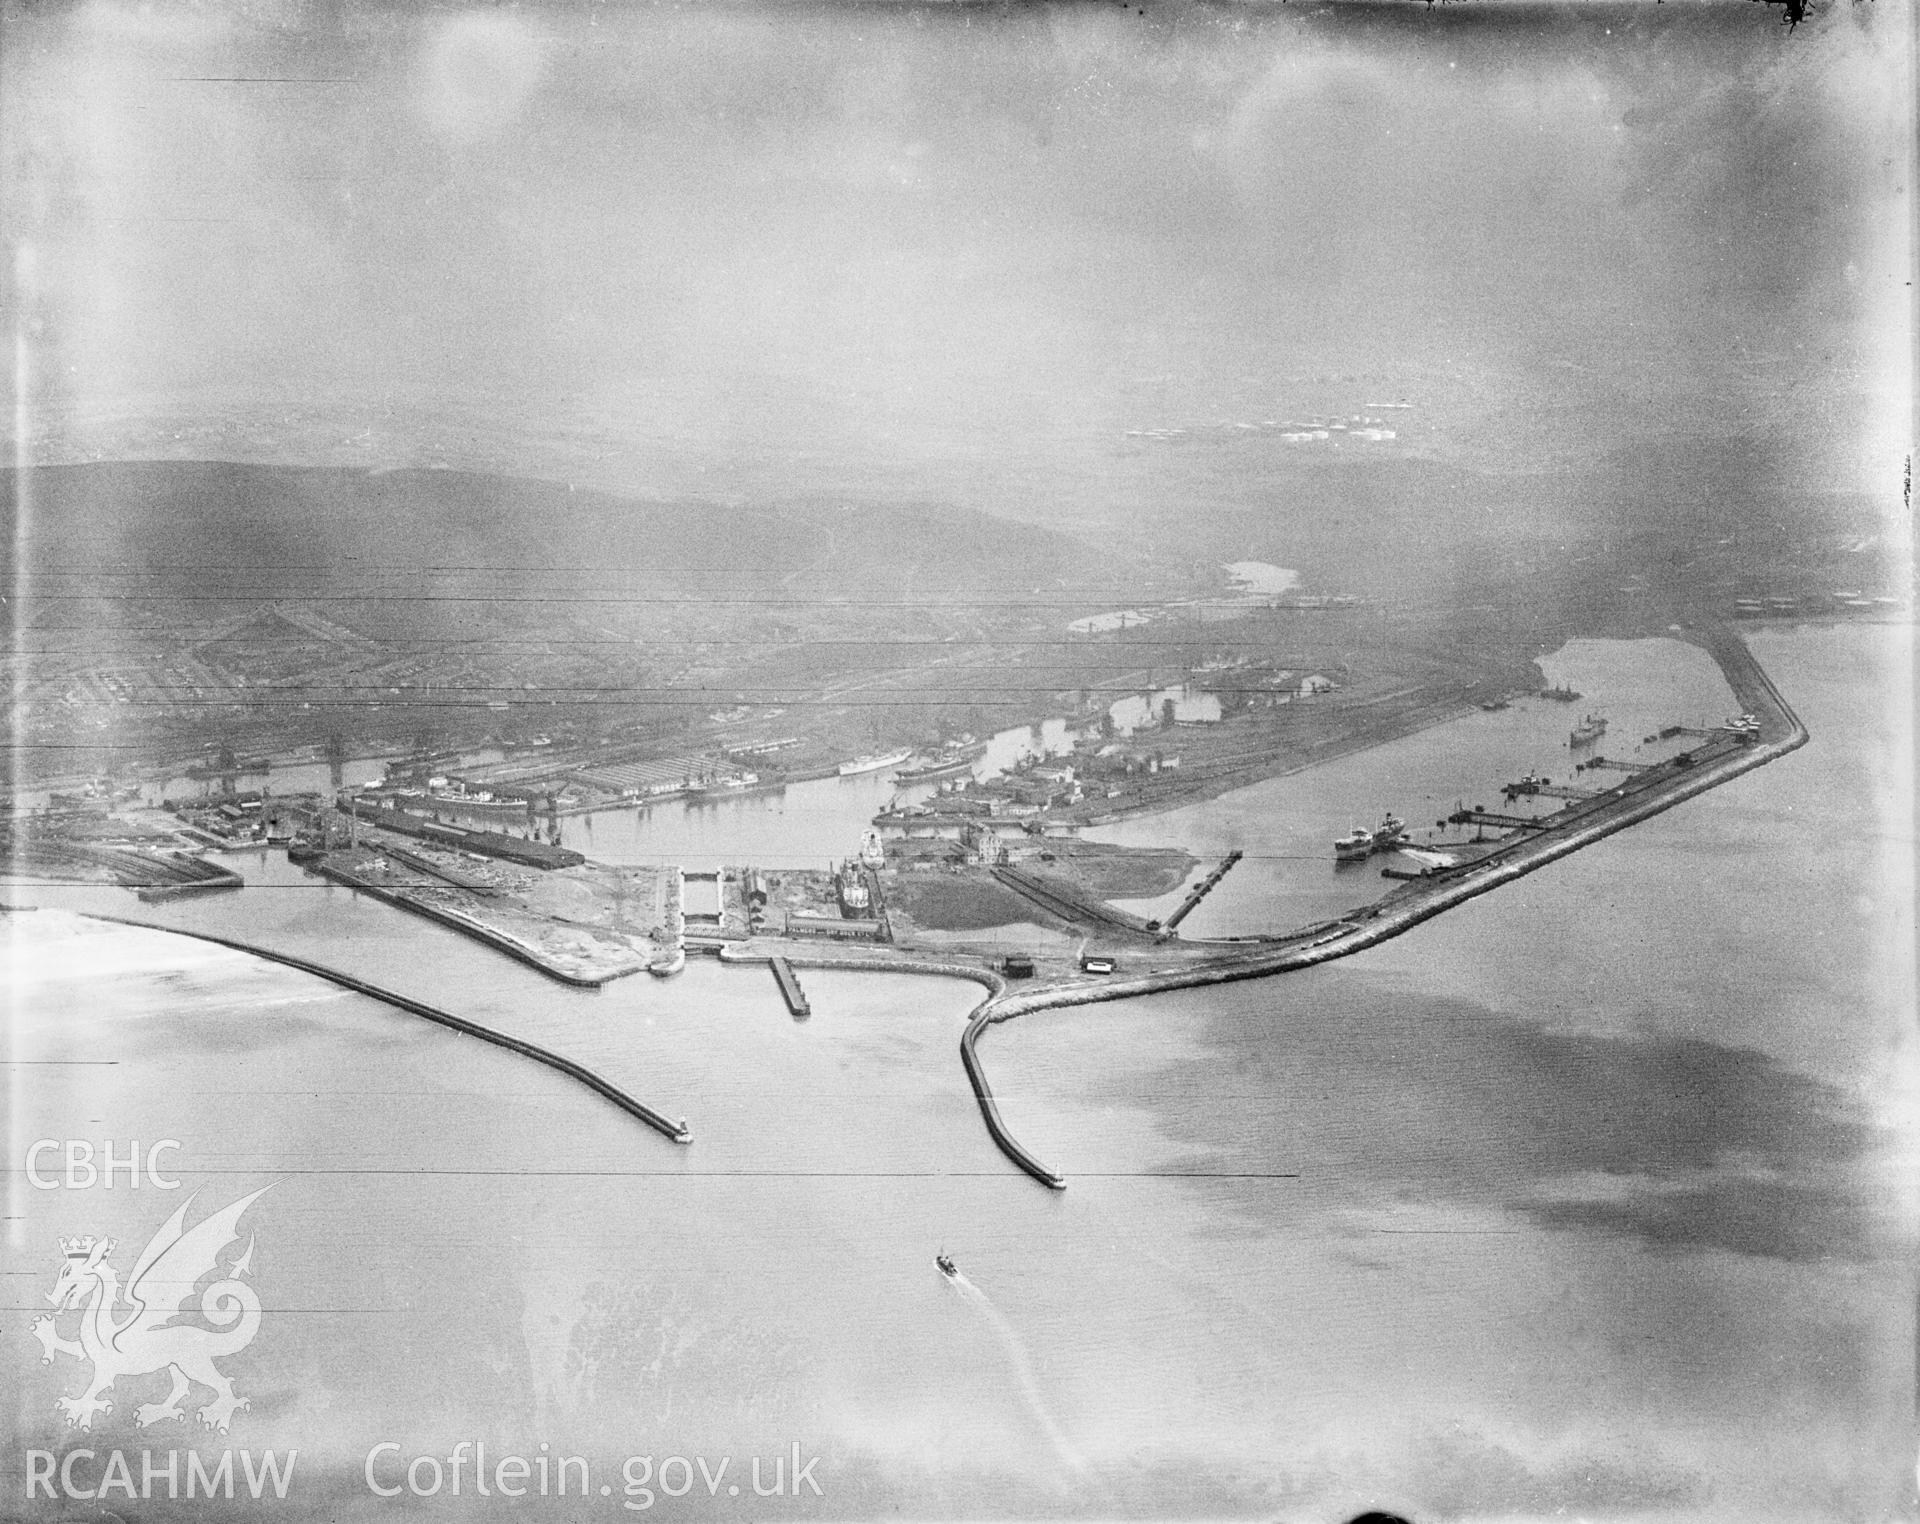 General view of Swansea Docks, oblique aerial view. 5?x4? black and white glass plate negative.